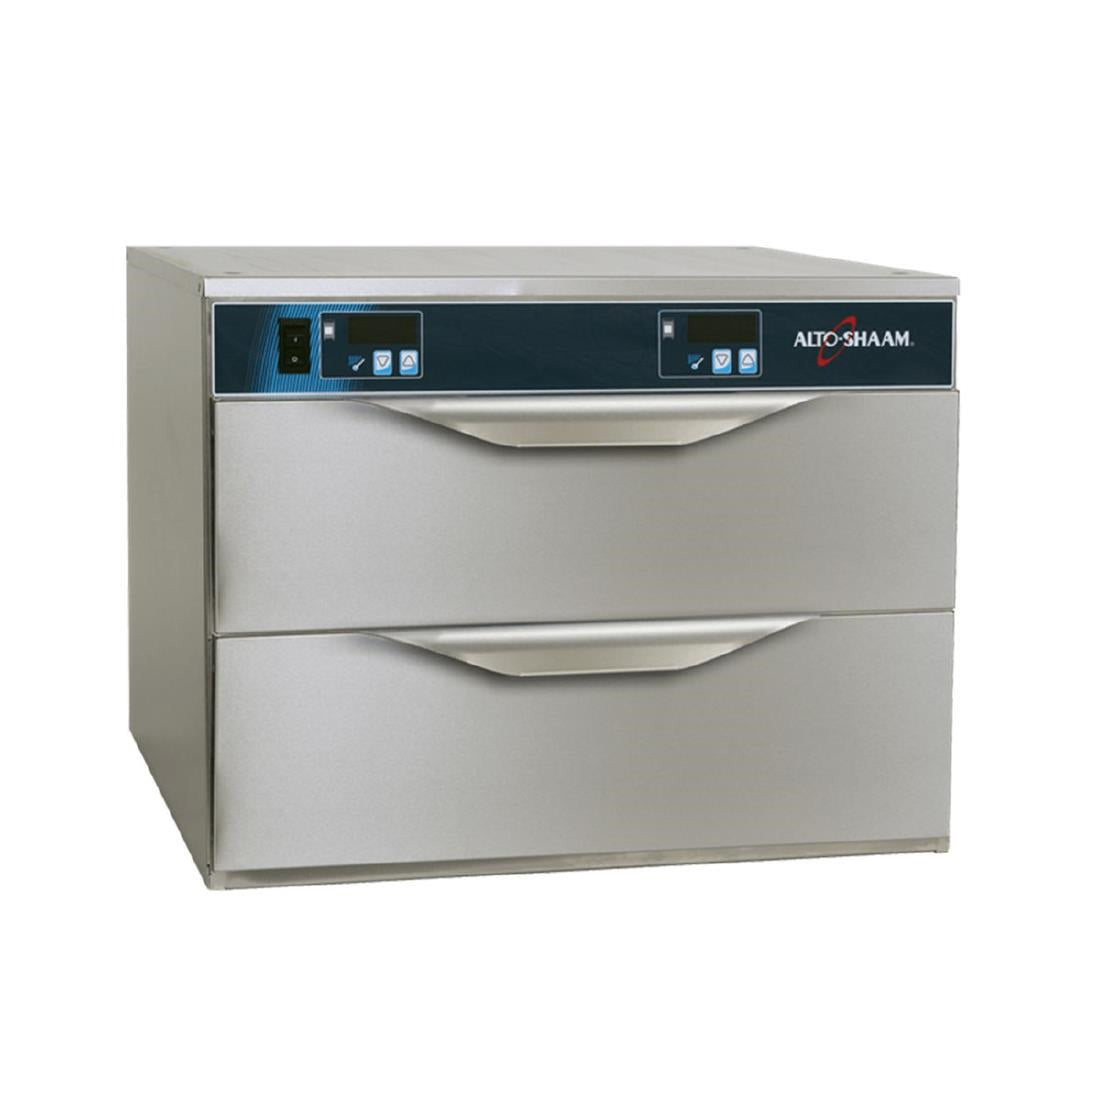 FP571 Alto-Shaam Drawer Warmer with Individual Controls 500-2DI JD Catering Equipment Solutions Ltd